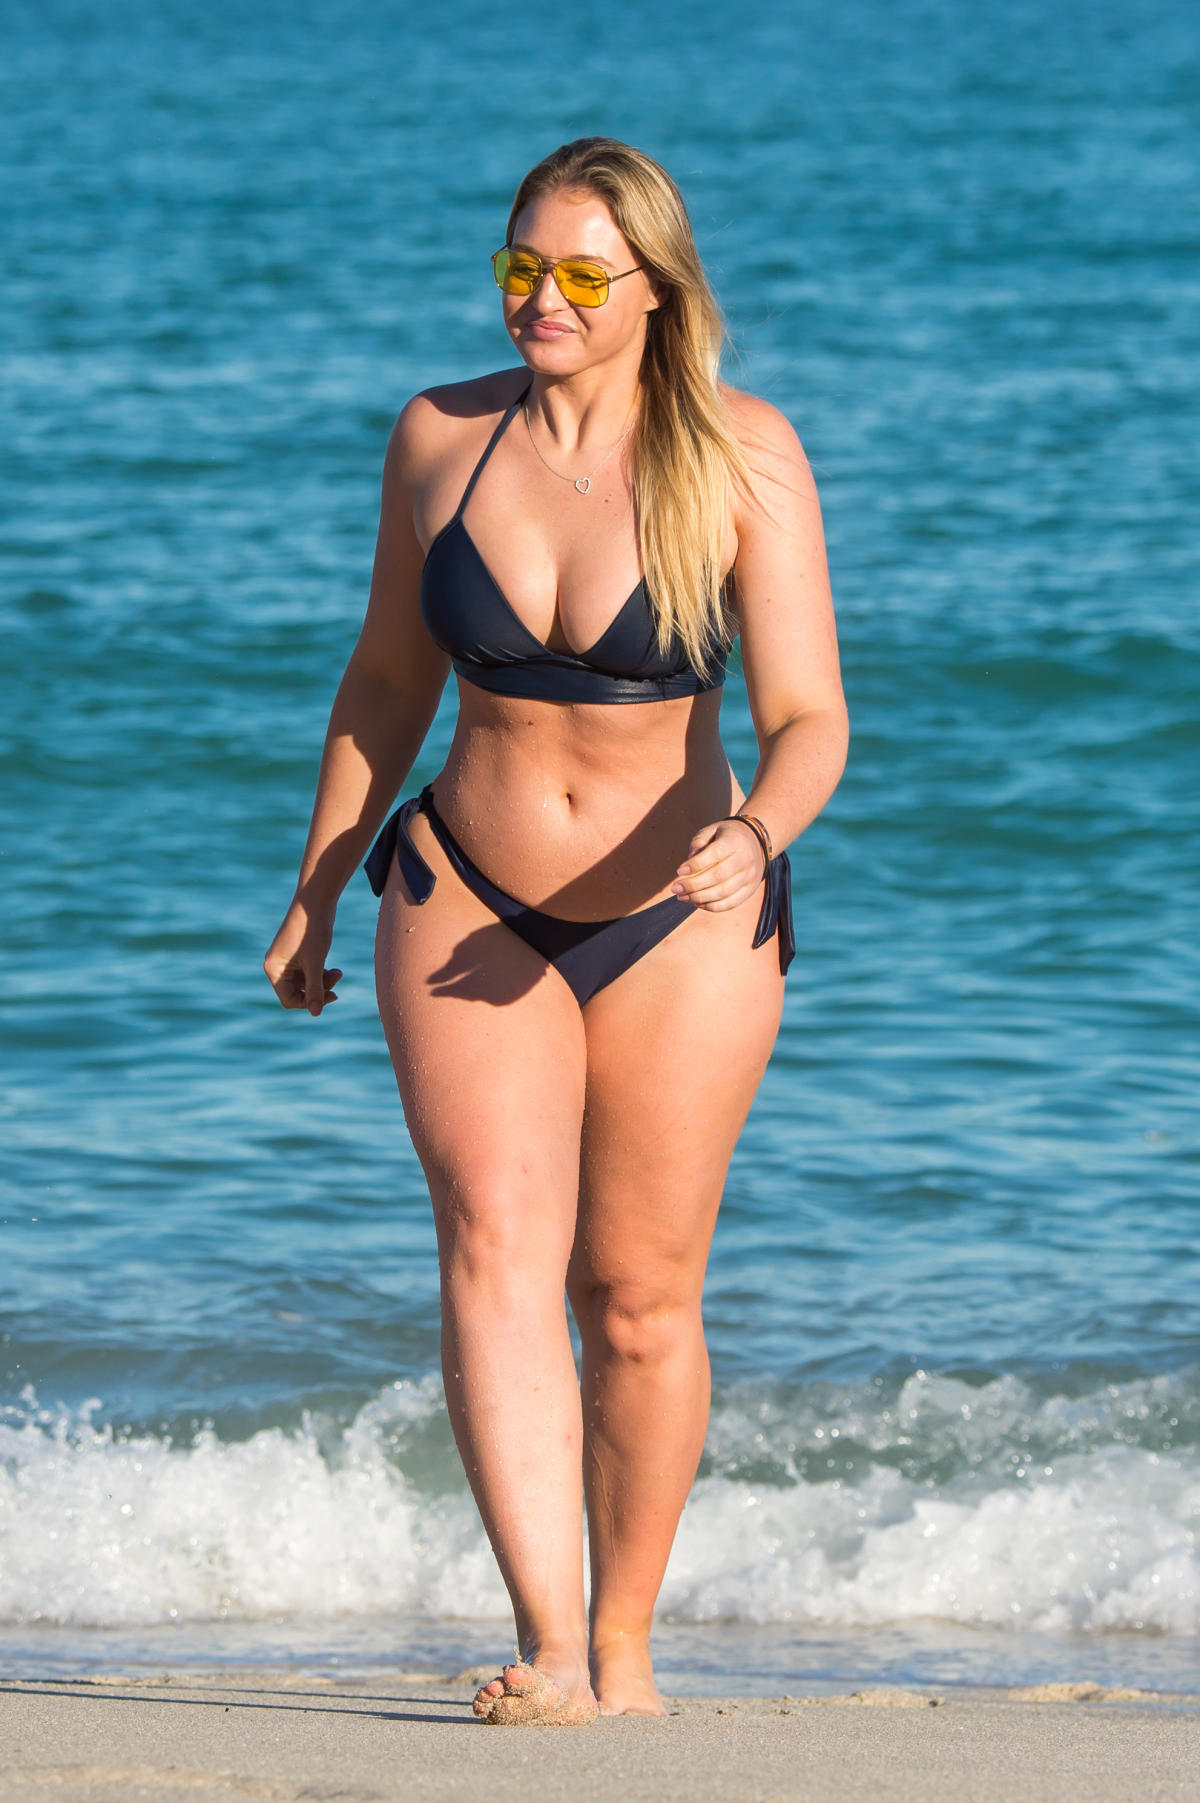 Interview With Plus-Size Model Iskra Lawrence, Managing Editor of